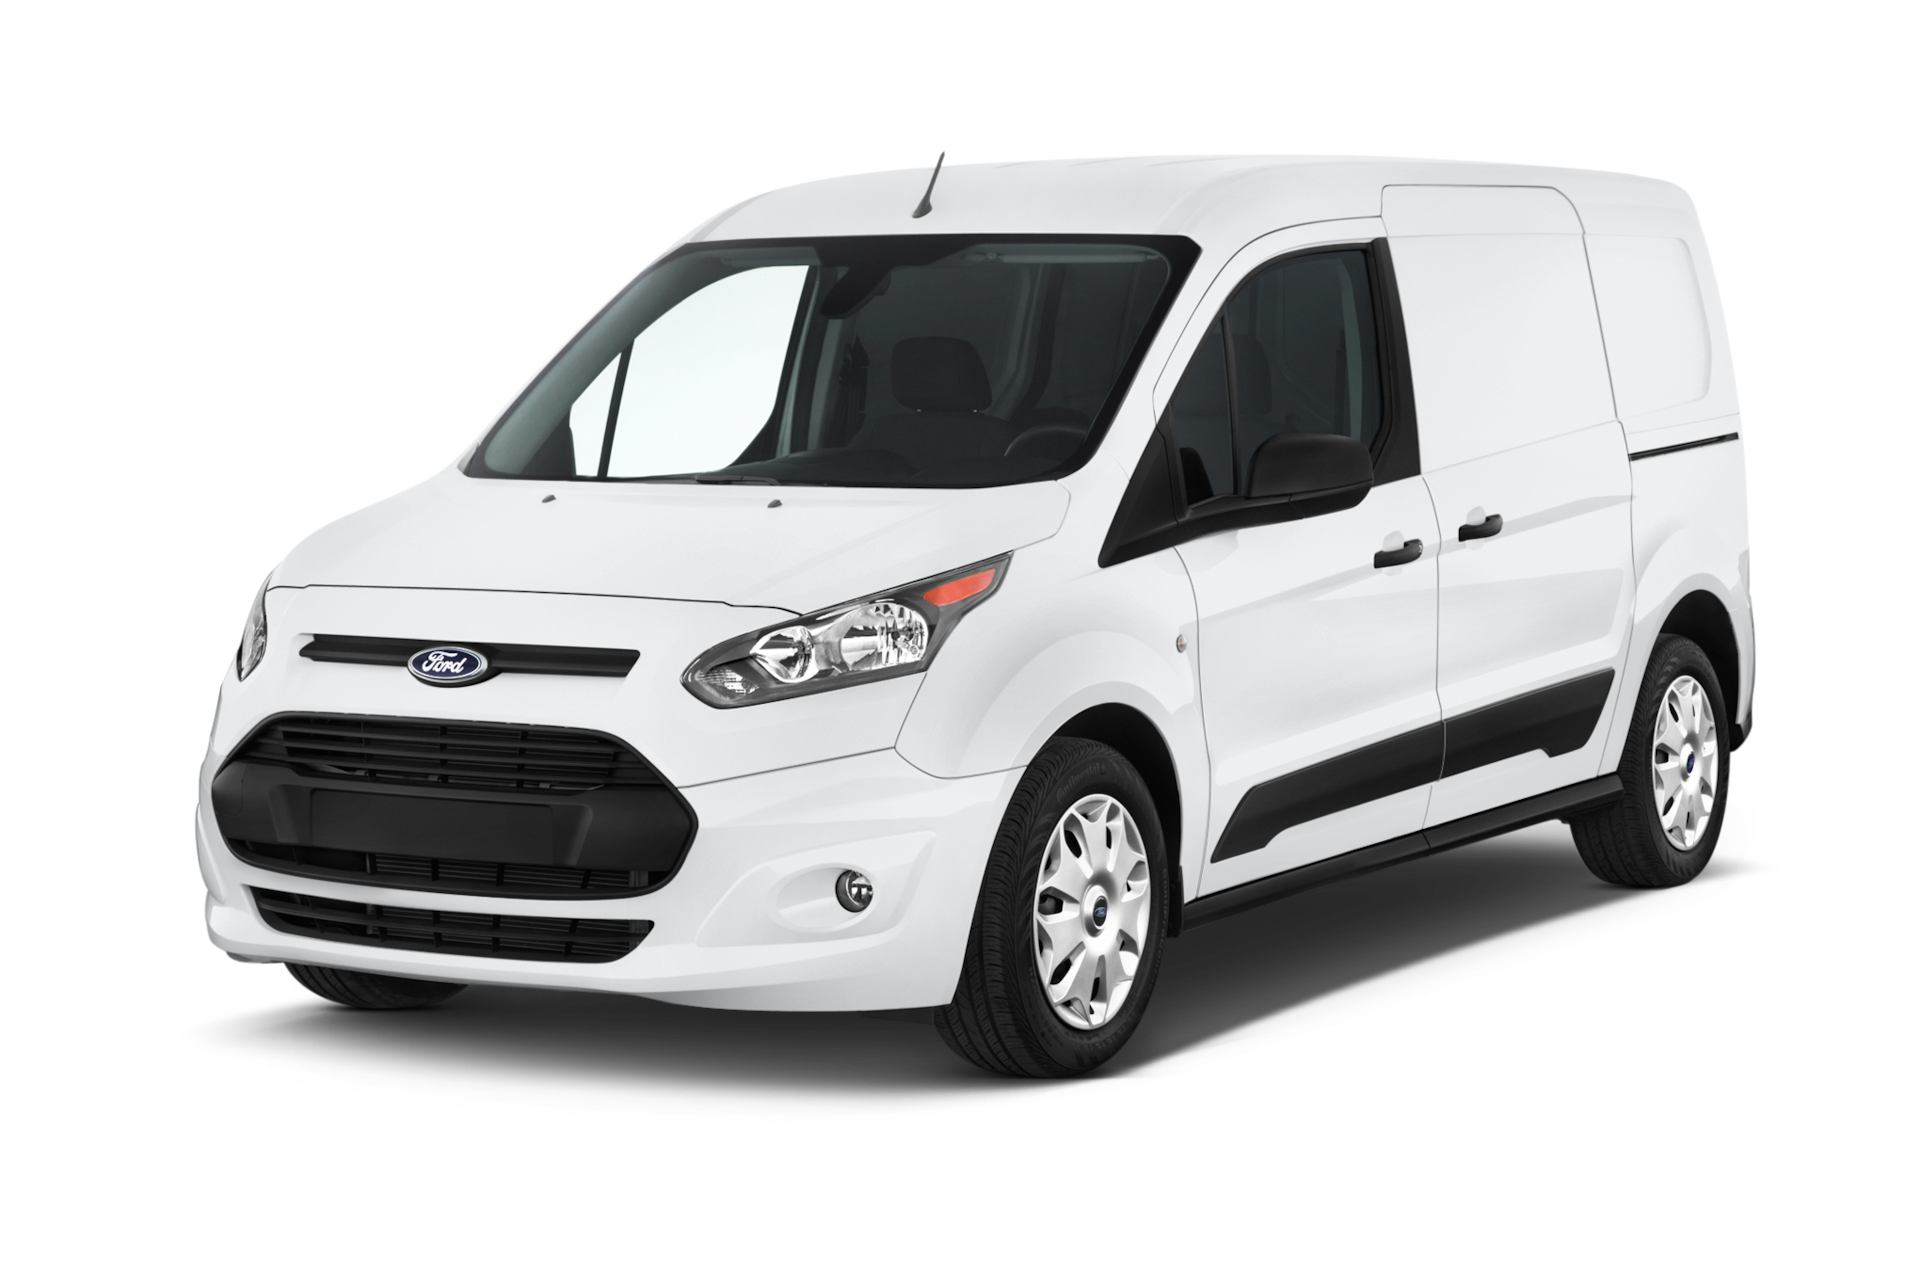 2017 Ford Transit Connect Prices, Reviews, and Photos - MotorTrend